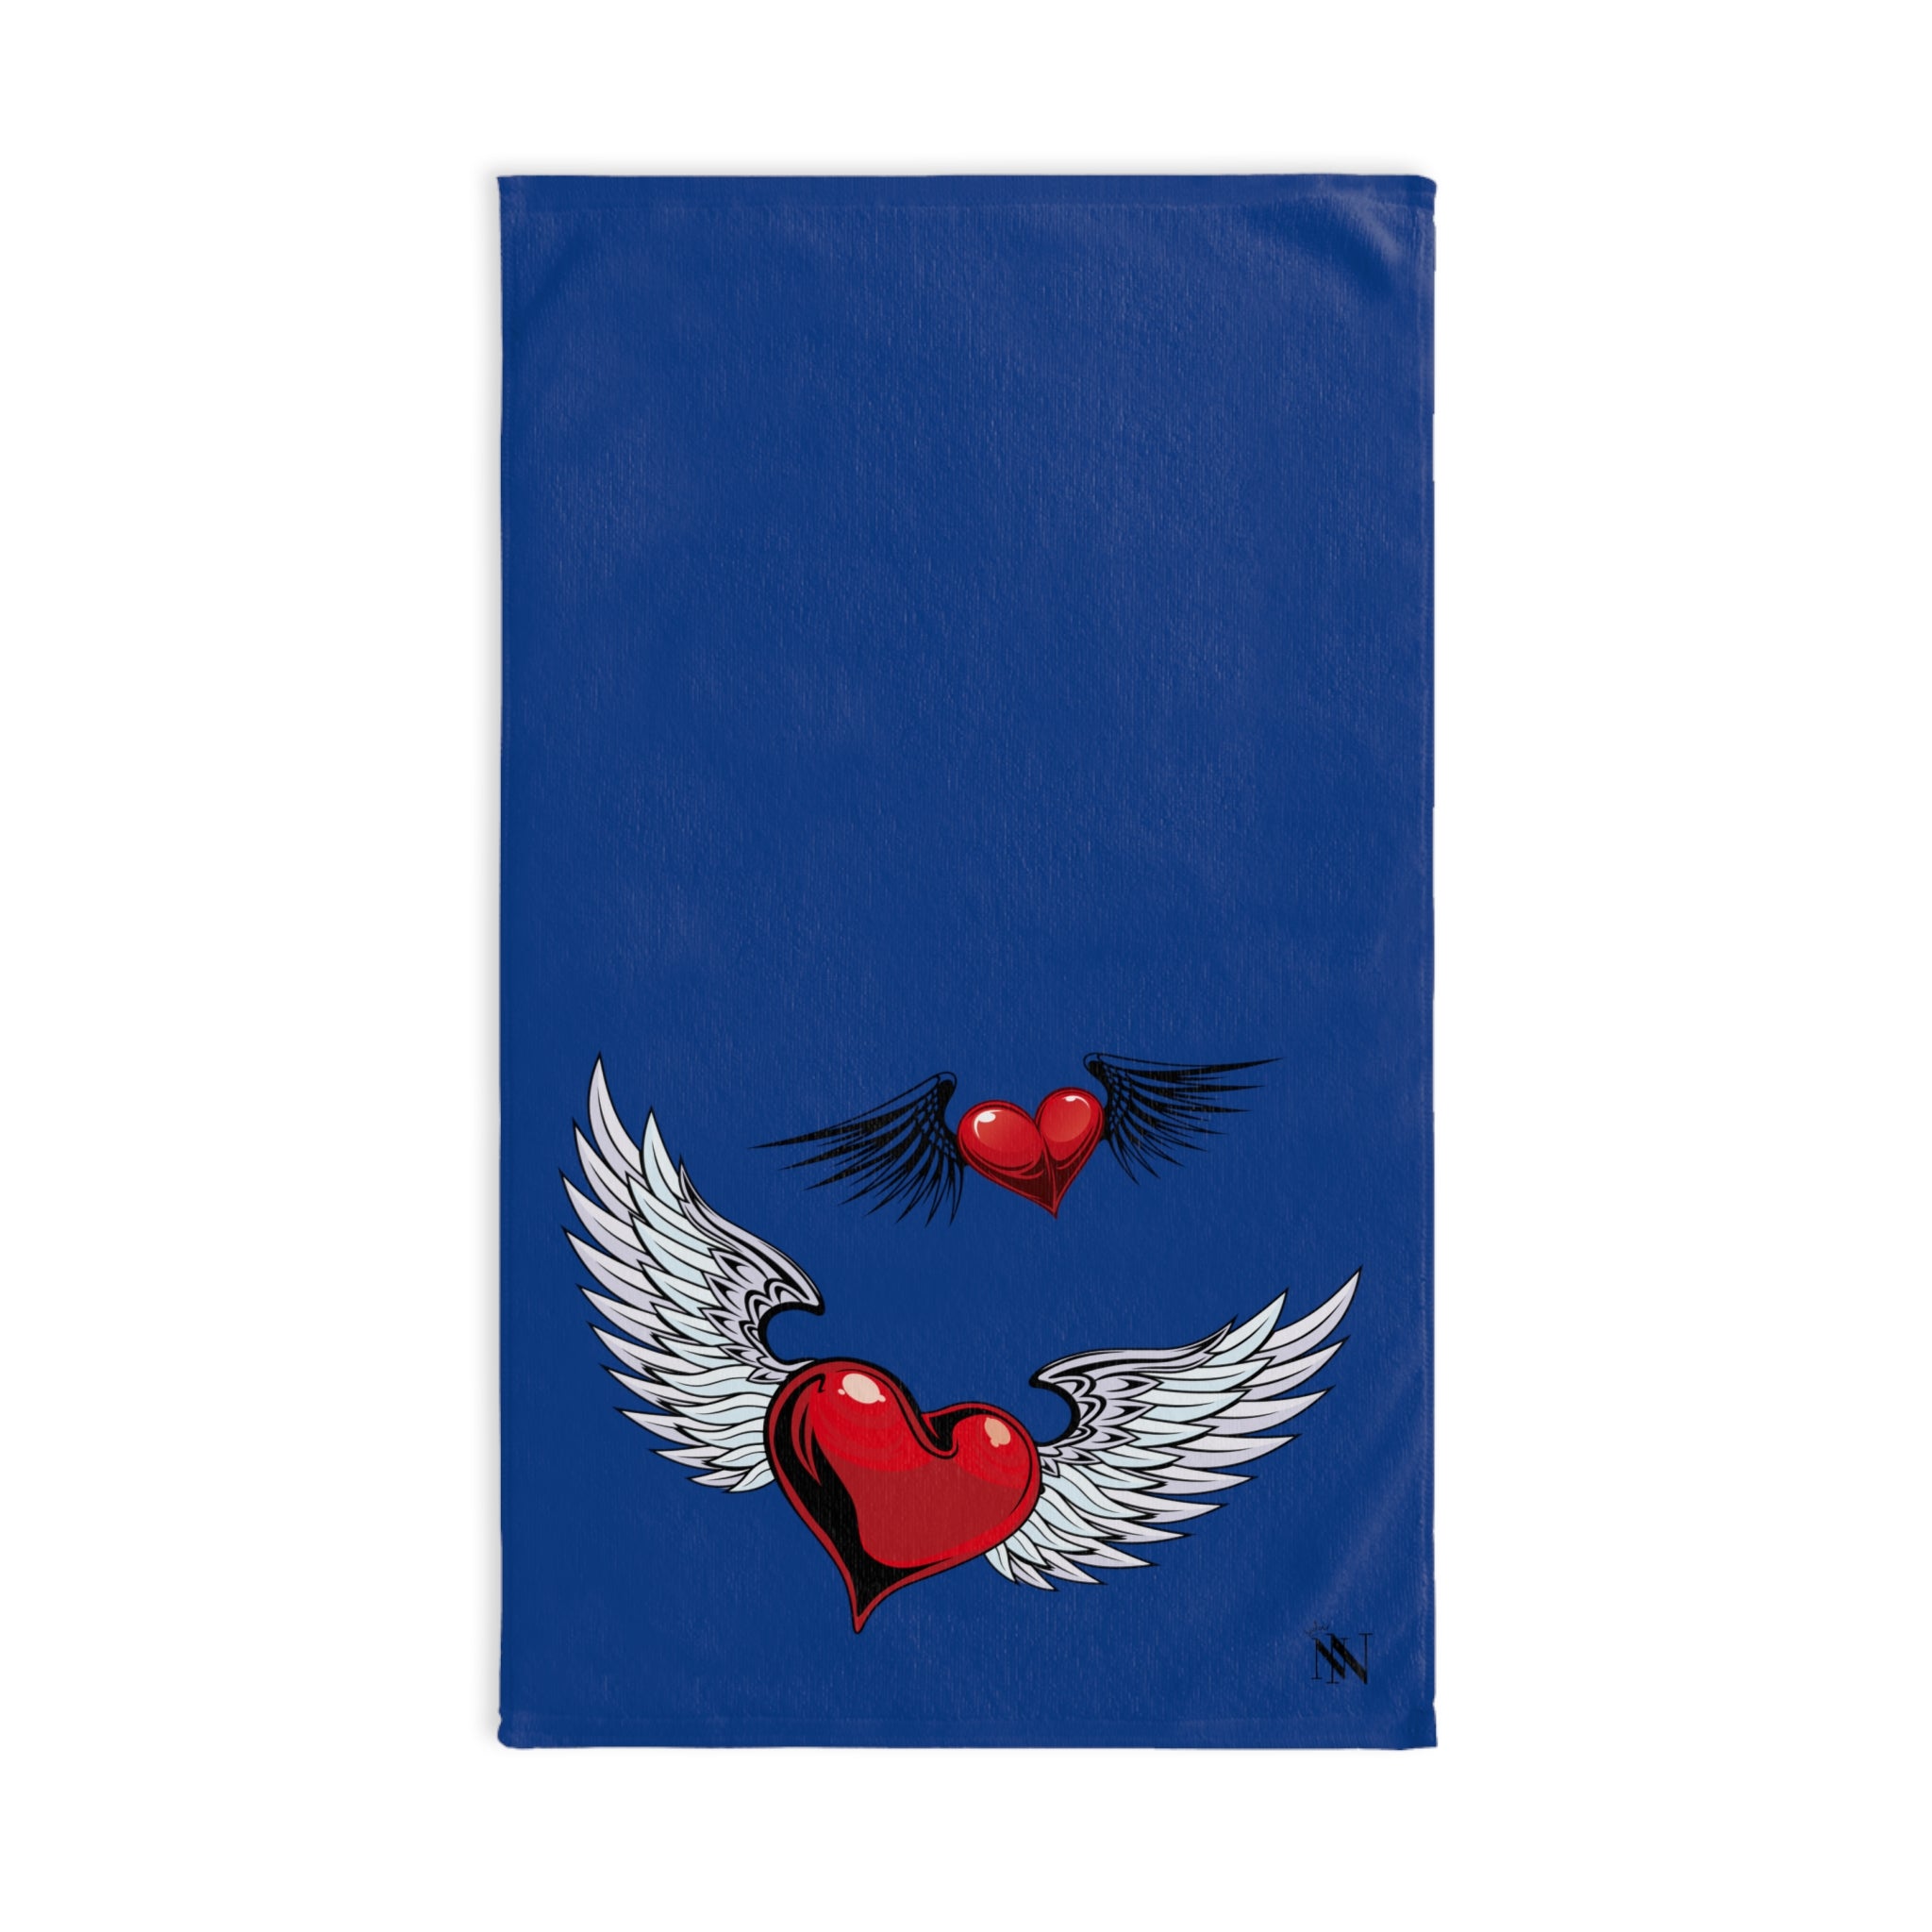 Twin Wing Heart Blue | Gifts for Boyfriend, Funny Towel Romantic Gift for Wedding Couple Fiance First Year Anniversary Valentines, Party Gag Gifts, Joke Humor Cloth for Husband Men BF NECTAR NAPKINS